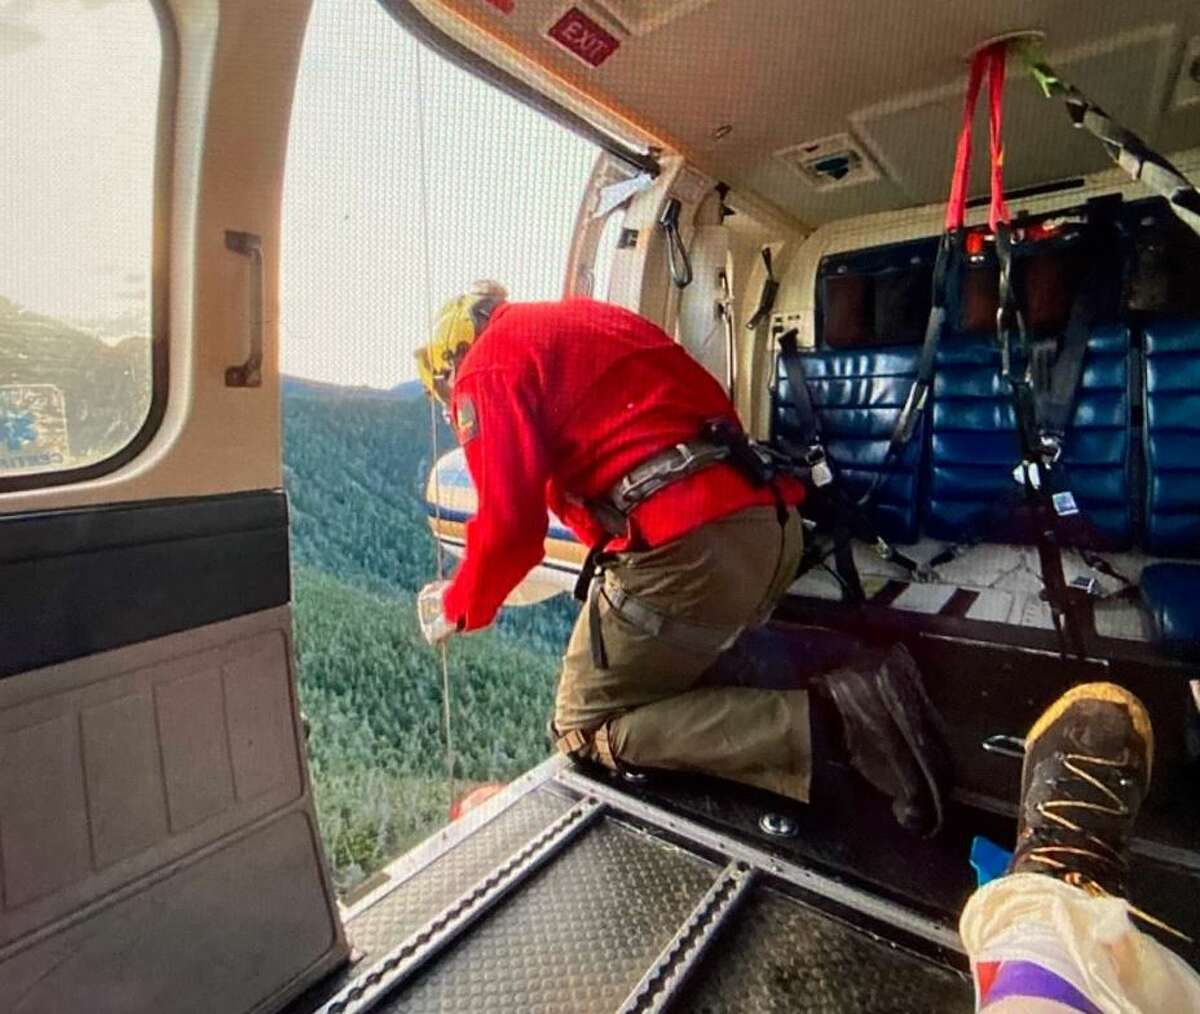 State forest rangers, and helicopter pilots from the State Police rescued two seriously injured hikers from the Adirondack High Peaks over the weekend. Both hikers had slipped on ice.